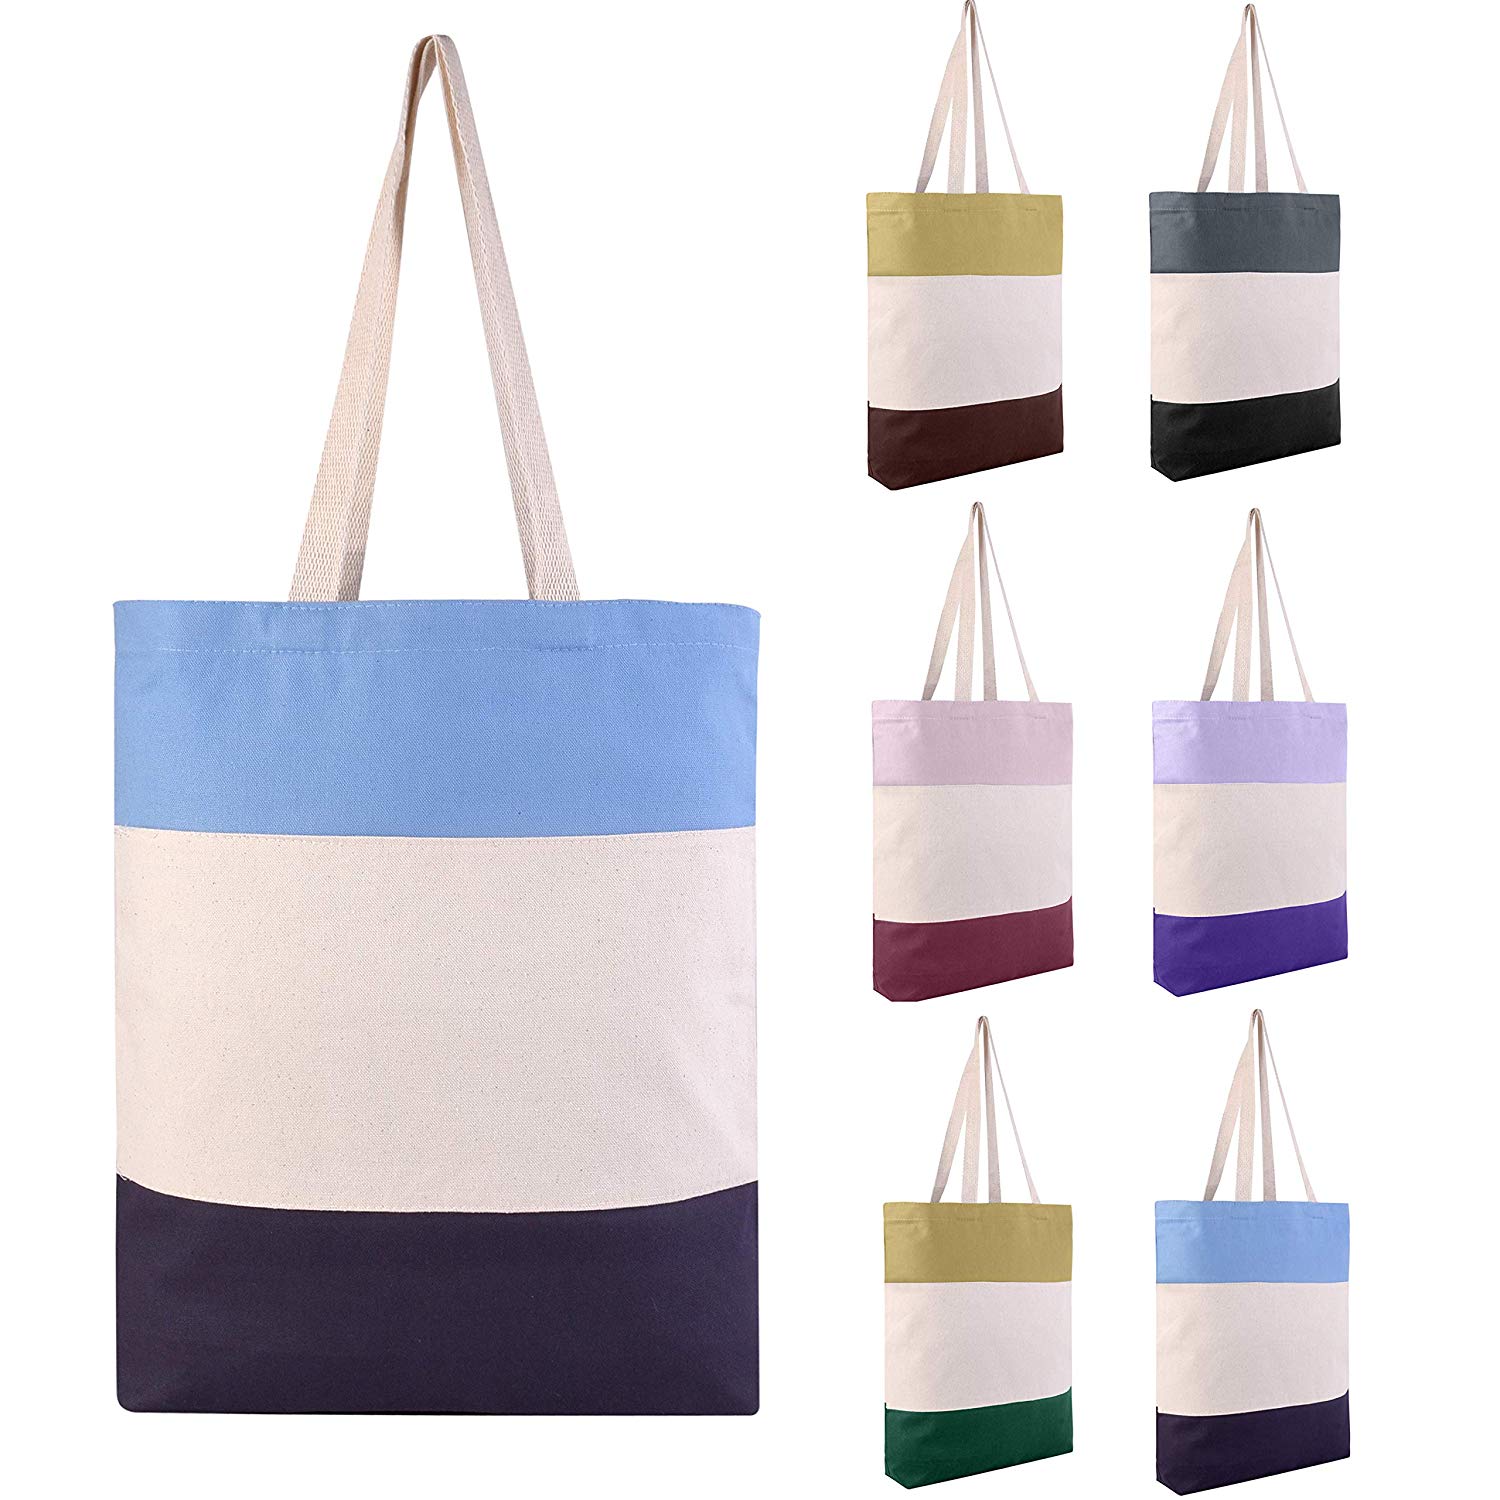 BagzDepot + Pack of 6 Reusable Canvas Tote Bags